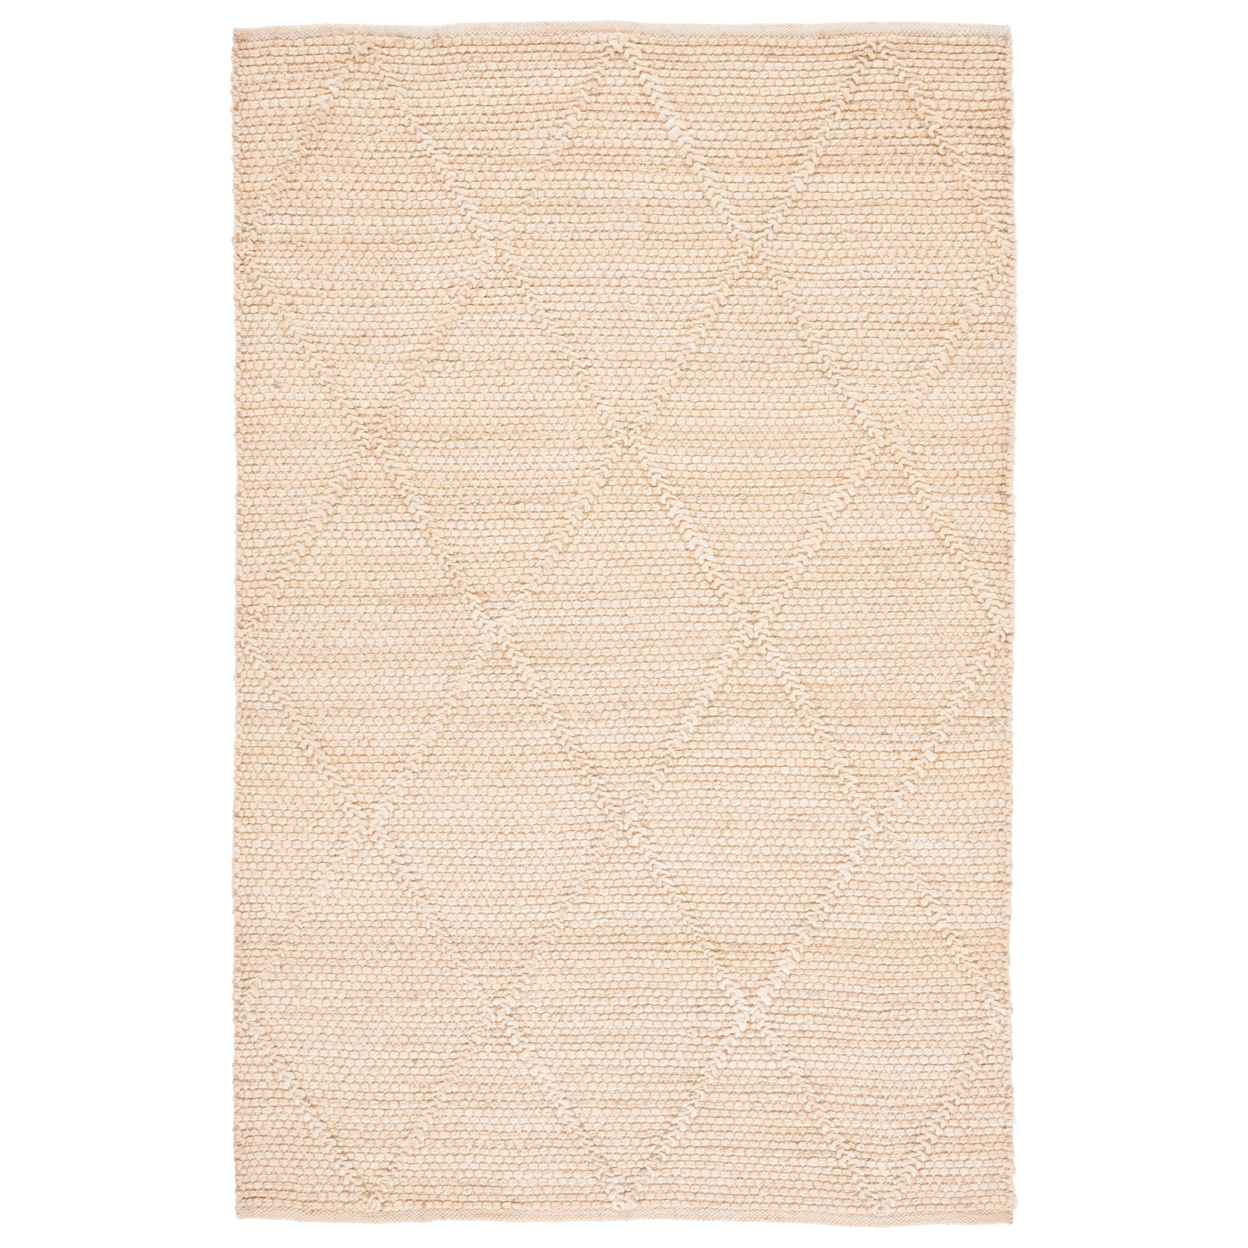 SAFAVIEH Natura Collection NAT925A Handwoven Ivory Rug - 6' Square